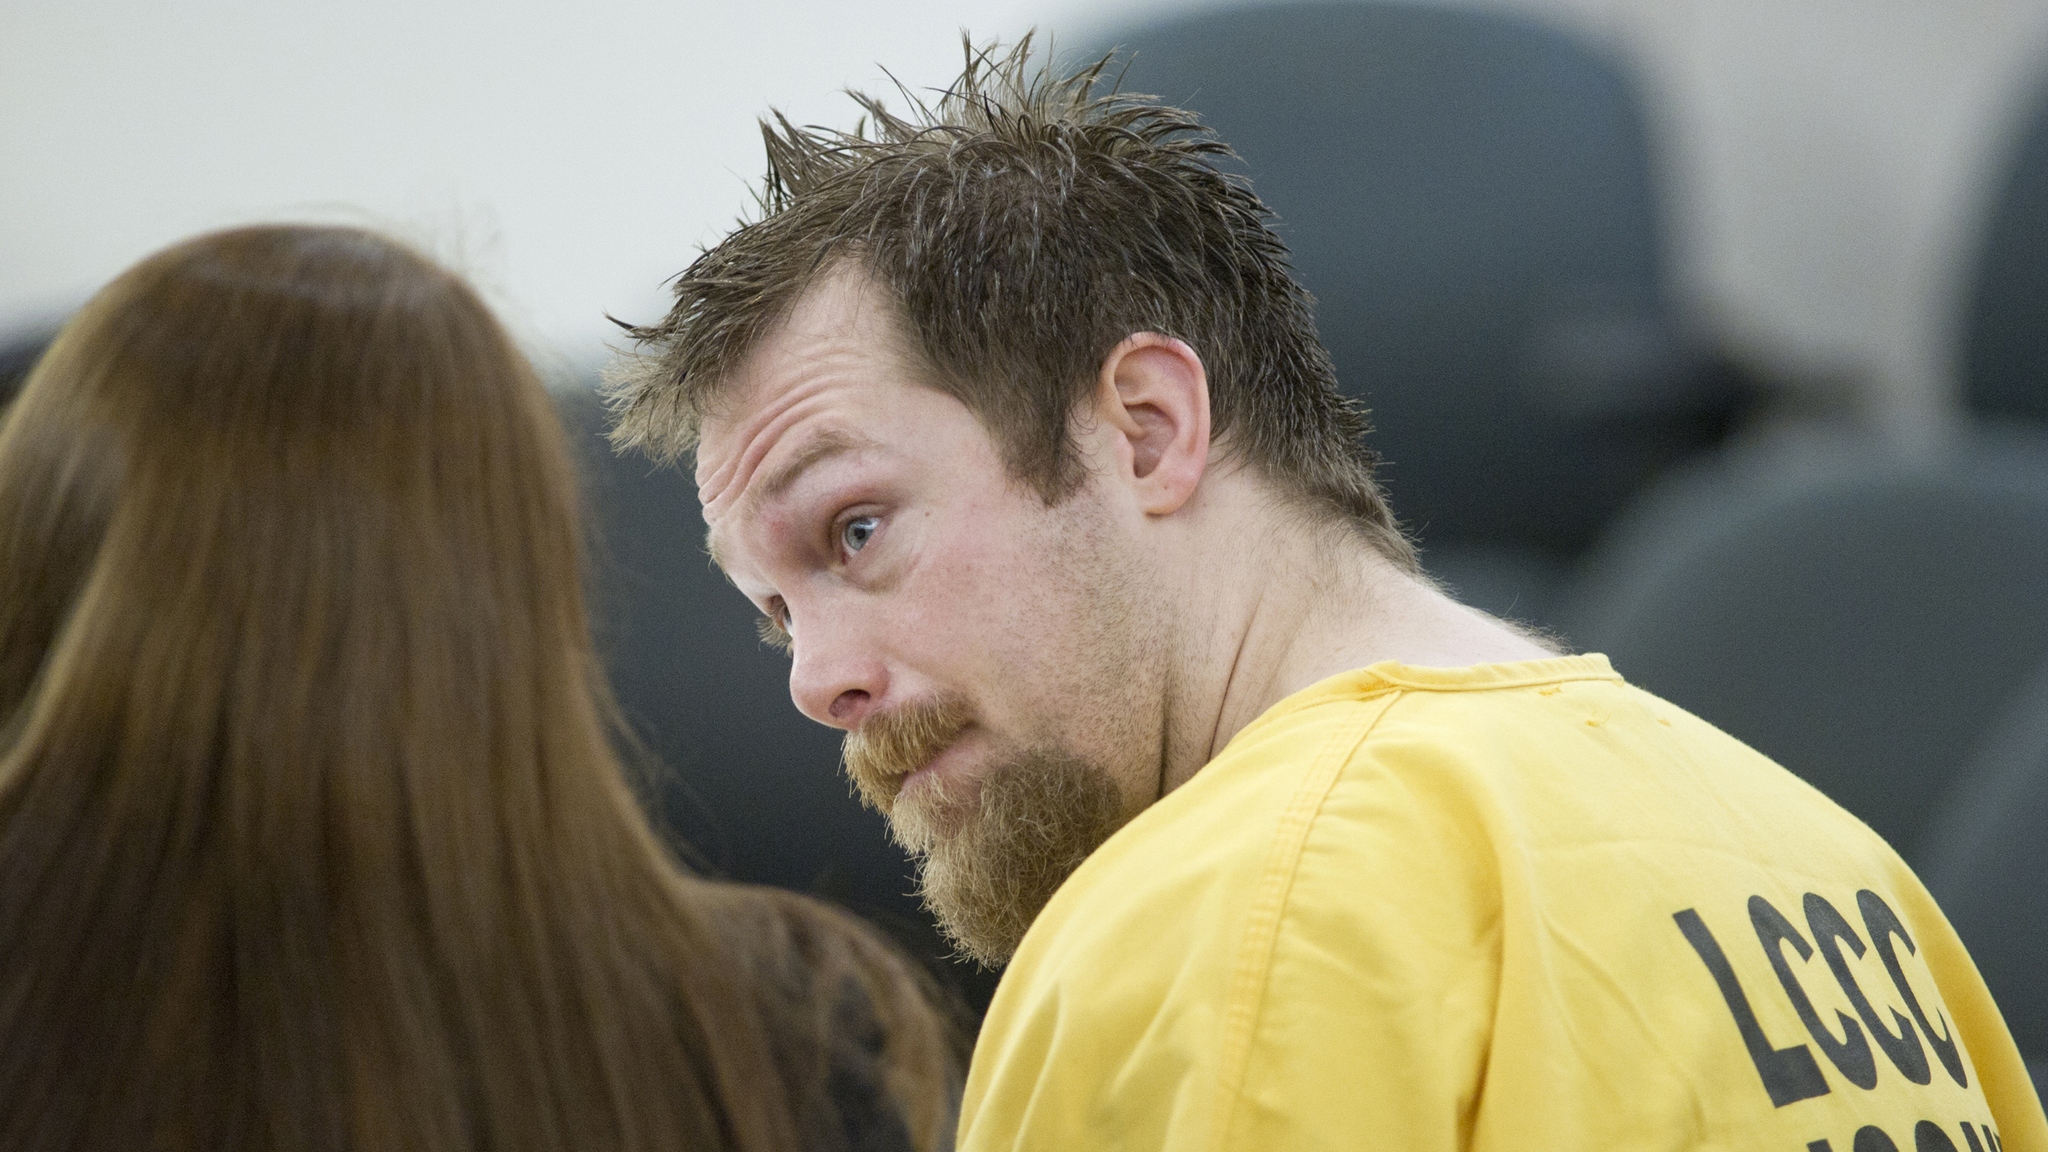 in this September 2016 file photo, Christopher D. Strawn, 33, appears in Juneau Superior Court for a status hearing on charges in the murder of 30-year-old Brandon C. Cook at the Kodzoff Acres Mobile Home Park Oct. 20, 2015. (Michael Penn | Juneau Empire file)